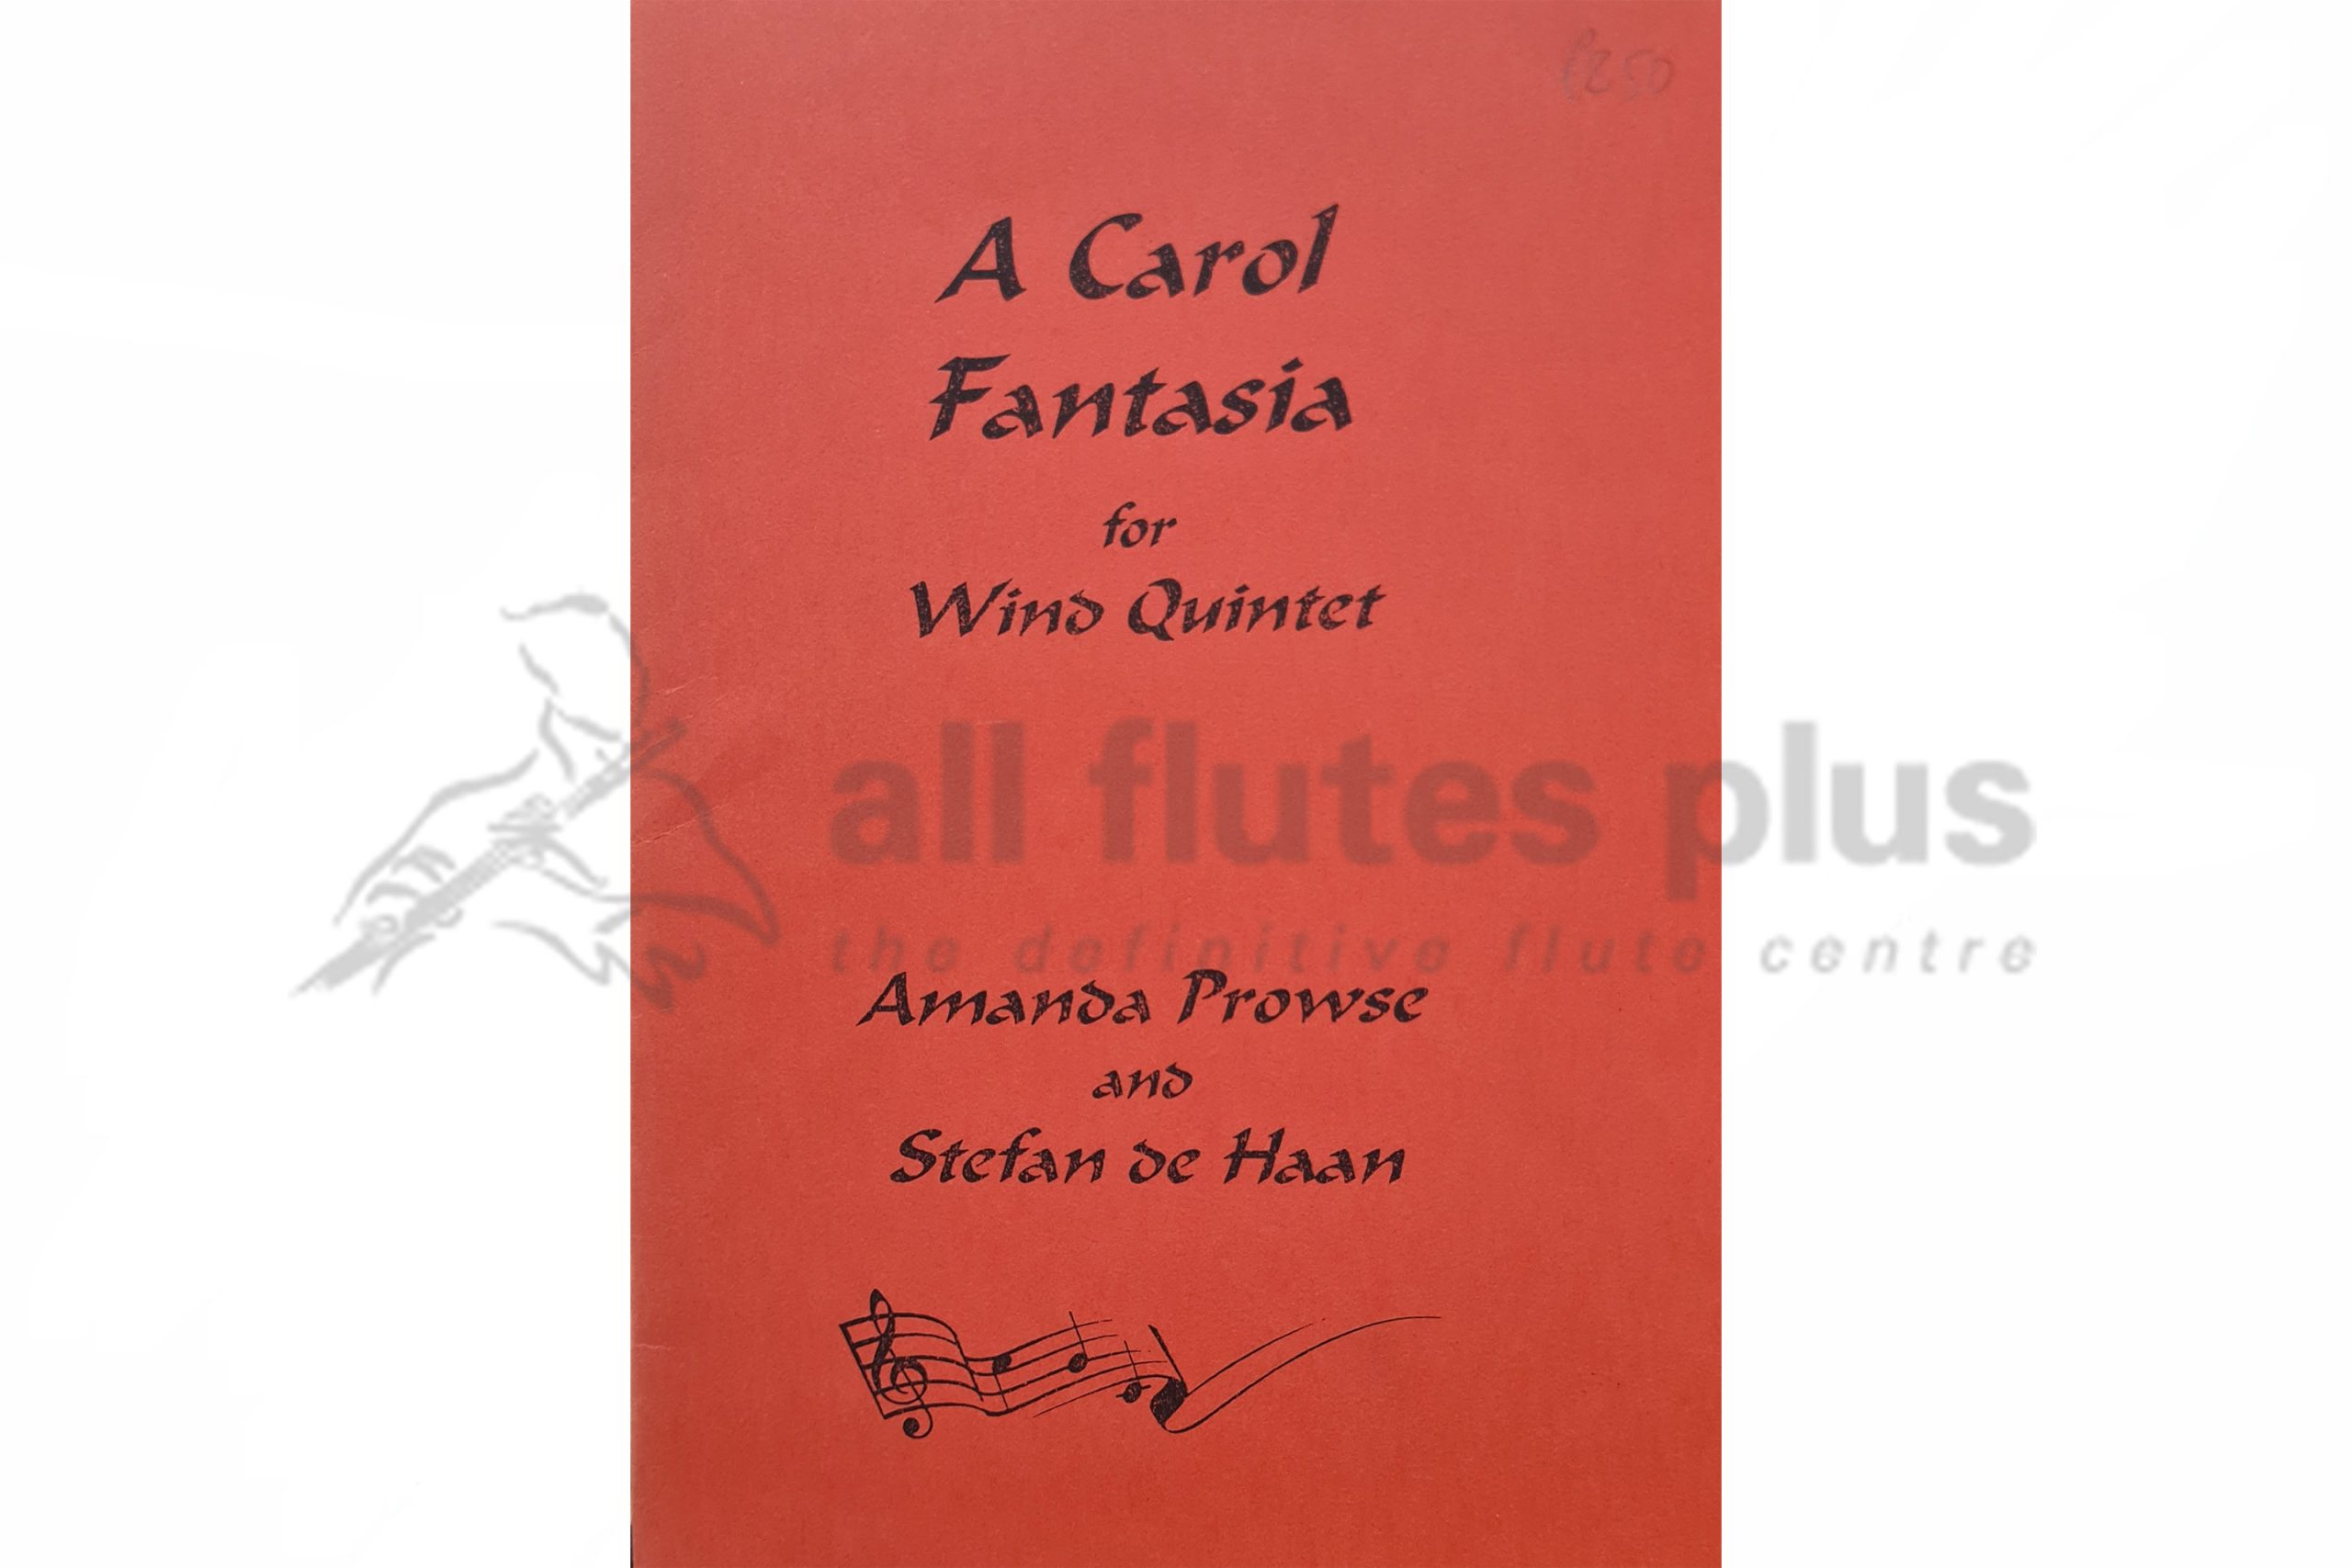 A Carol Fantasia for Wind Quintet by Prowse and Haan